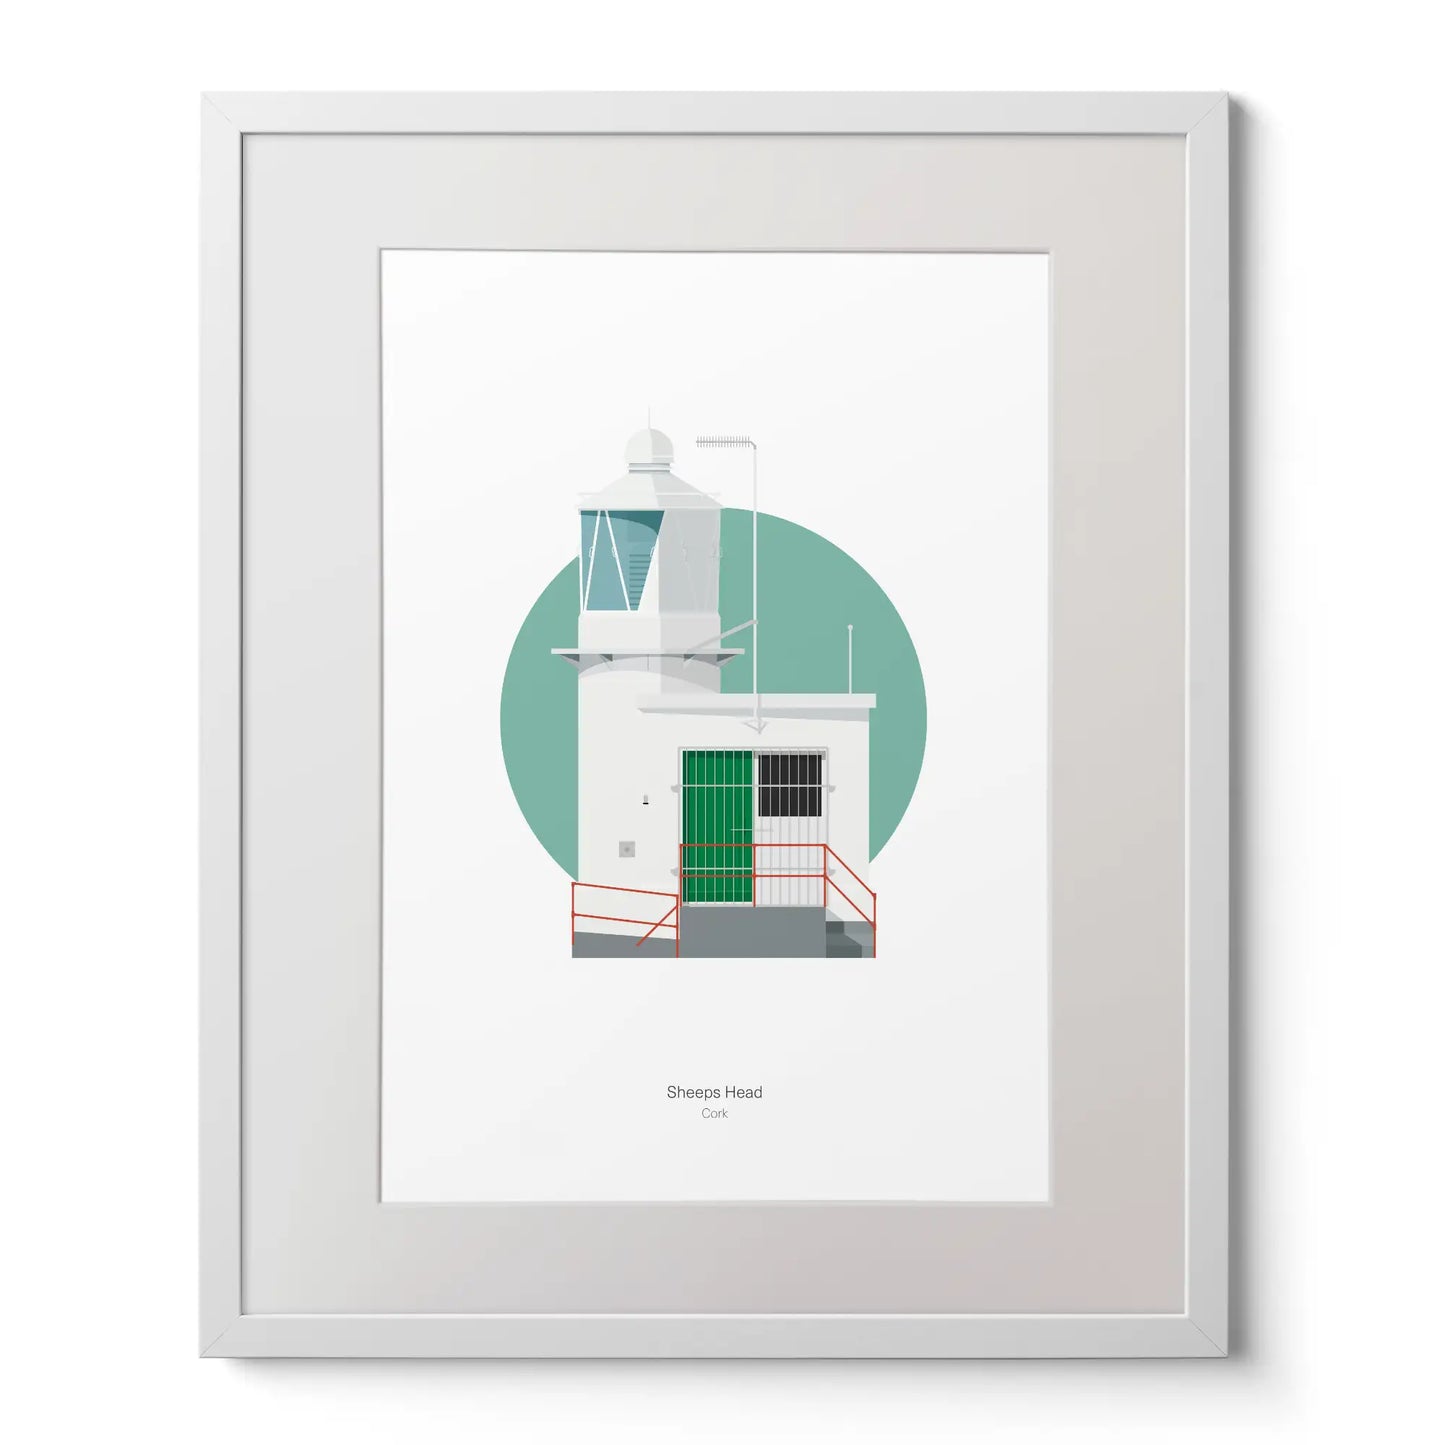 Contemporary art print of Sheeps Head lighthouse on a white background inside light blue square,  in a white frame measuring 40x50cm.